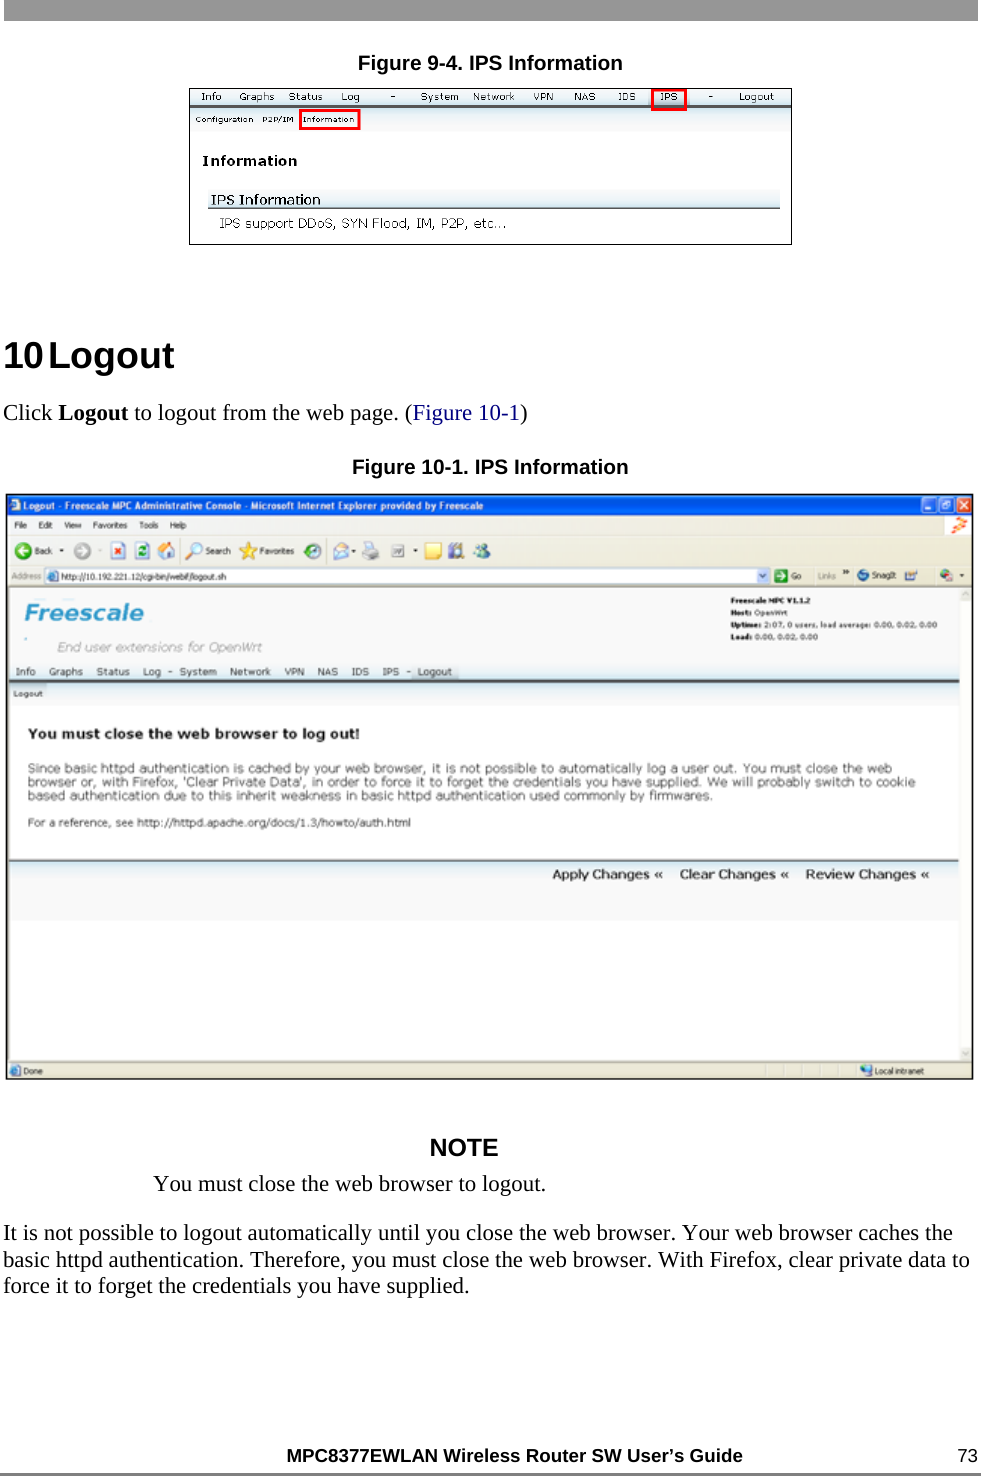                                                          MPC8377EWLAN Wireless Router SW User’s Guide    73 Figure 9-4. IPS Information  10 Logout Click Logout to logout from the web page. (Figure 10-1) Figure 10-1. IPS Information  NOTE You must close the web browser to logout. It is not possible to logout automatically until you close the web browser. Your web browser caches the basic httpd authentication. Therefore, you must close the web browser. With Firefox, clear private data to force it to forget the credentials you have supplied.  